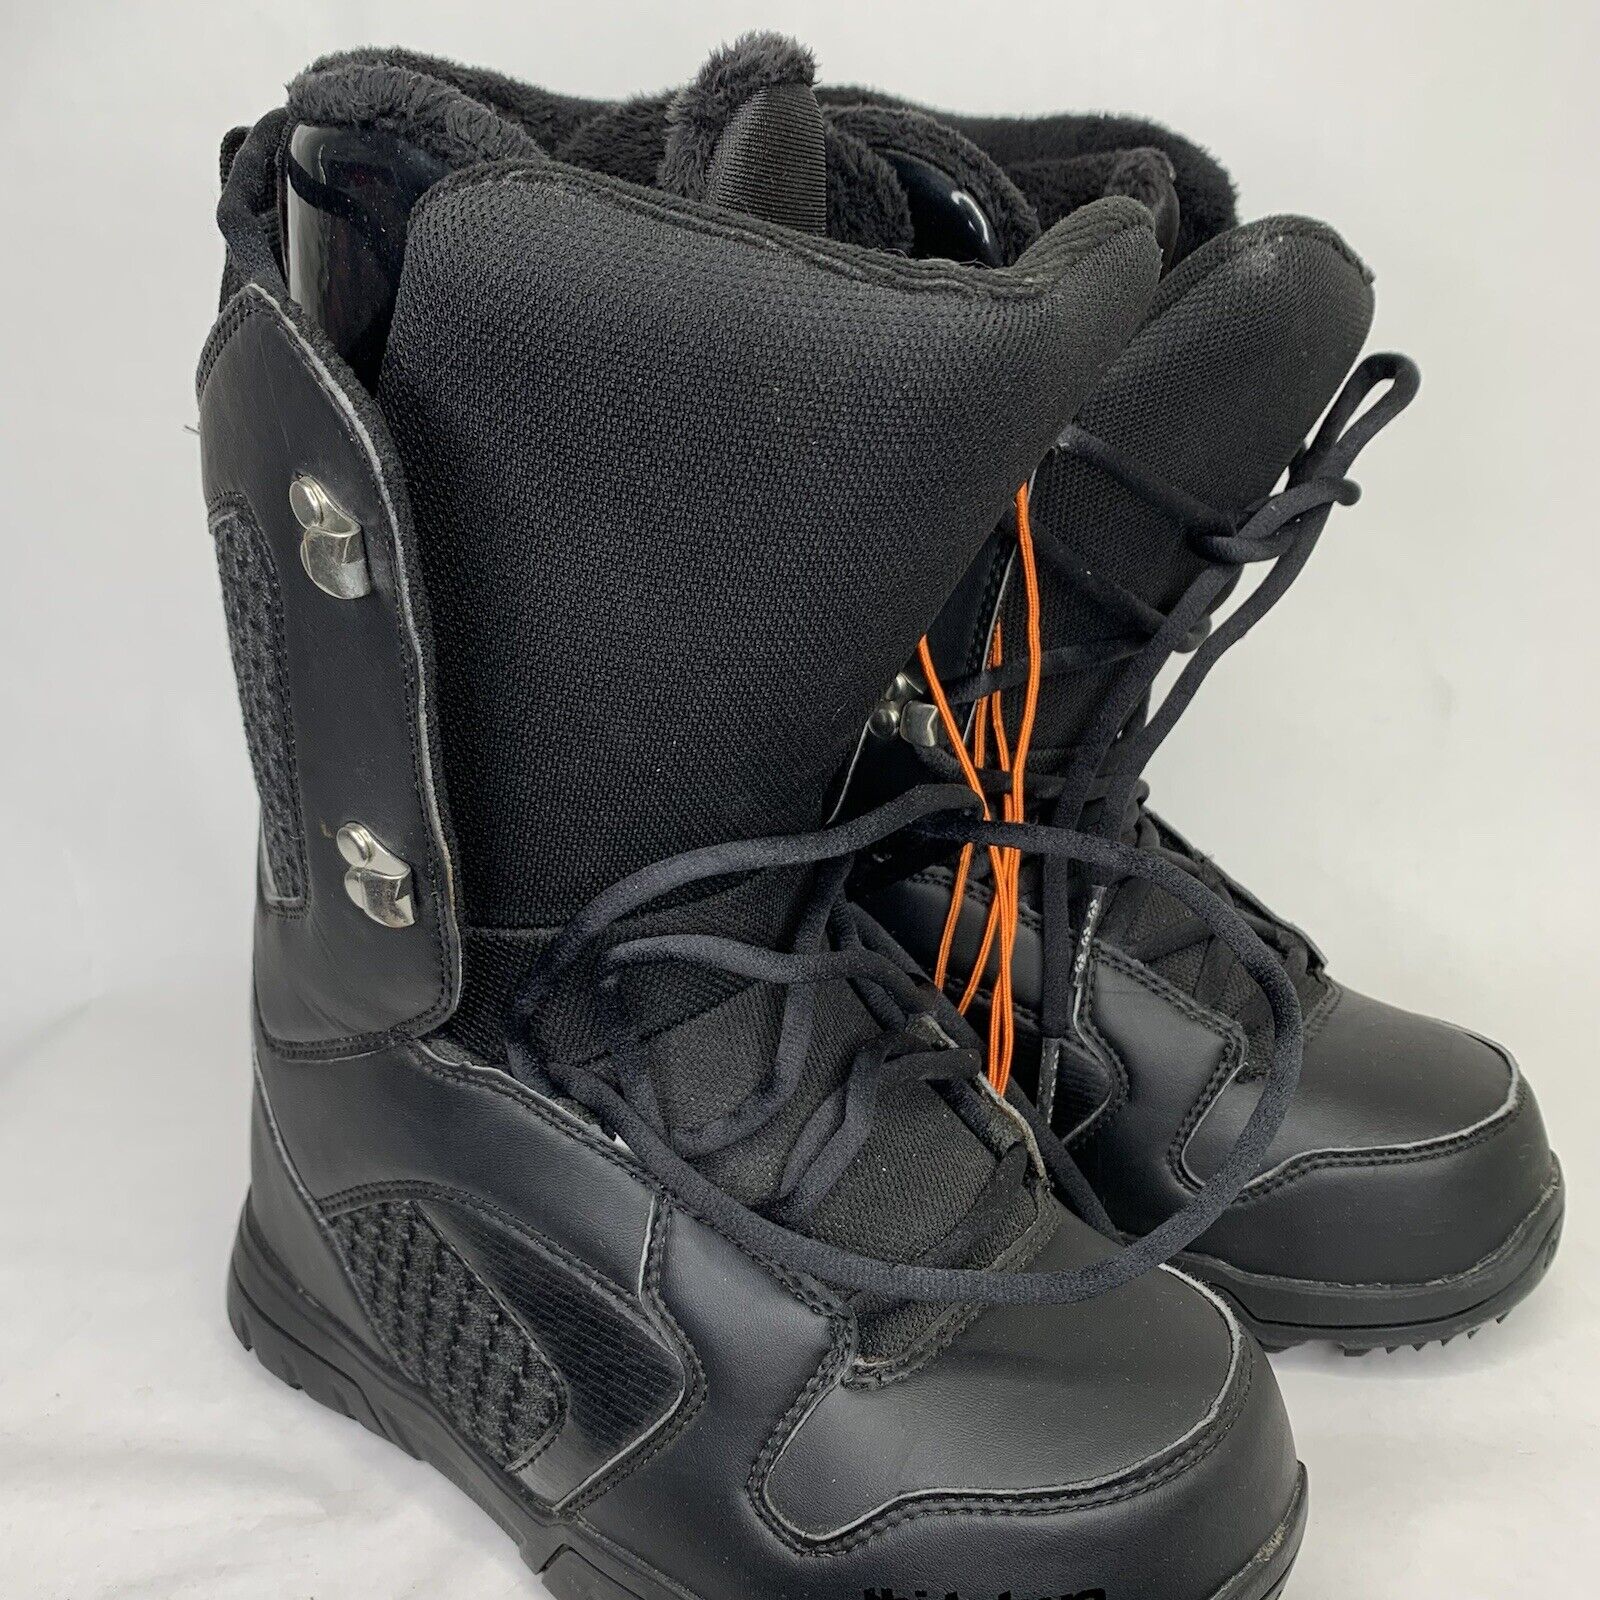 Thirtytwo Womens Snowboarding Boots Fall 2015 Black 7.5